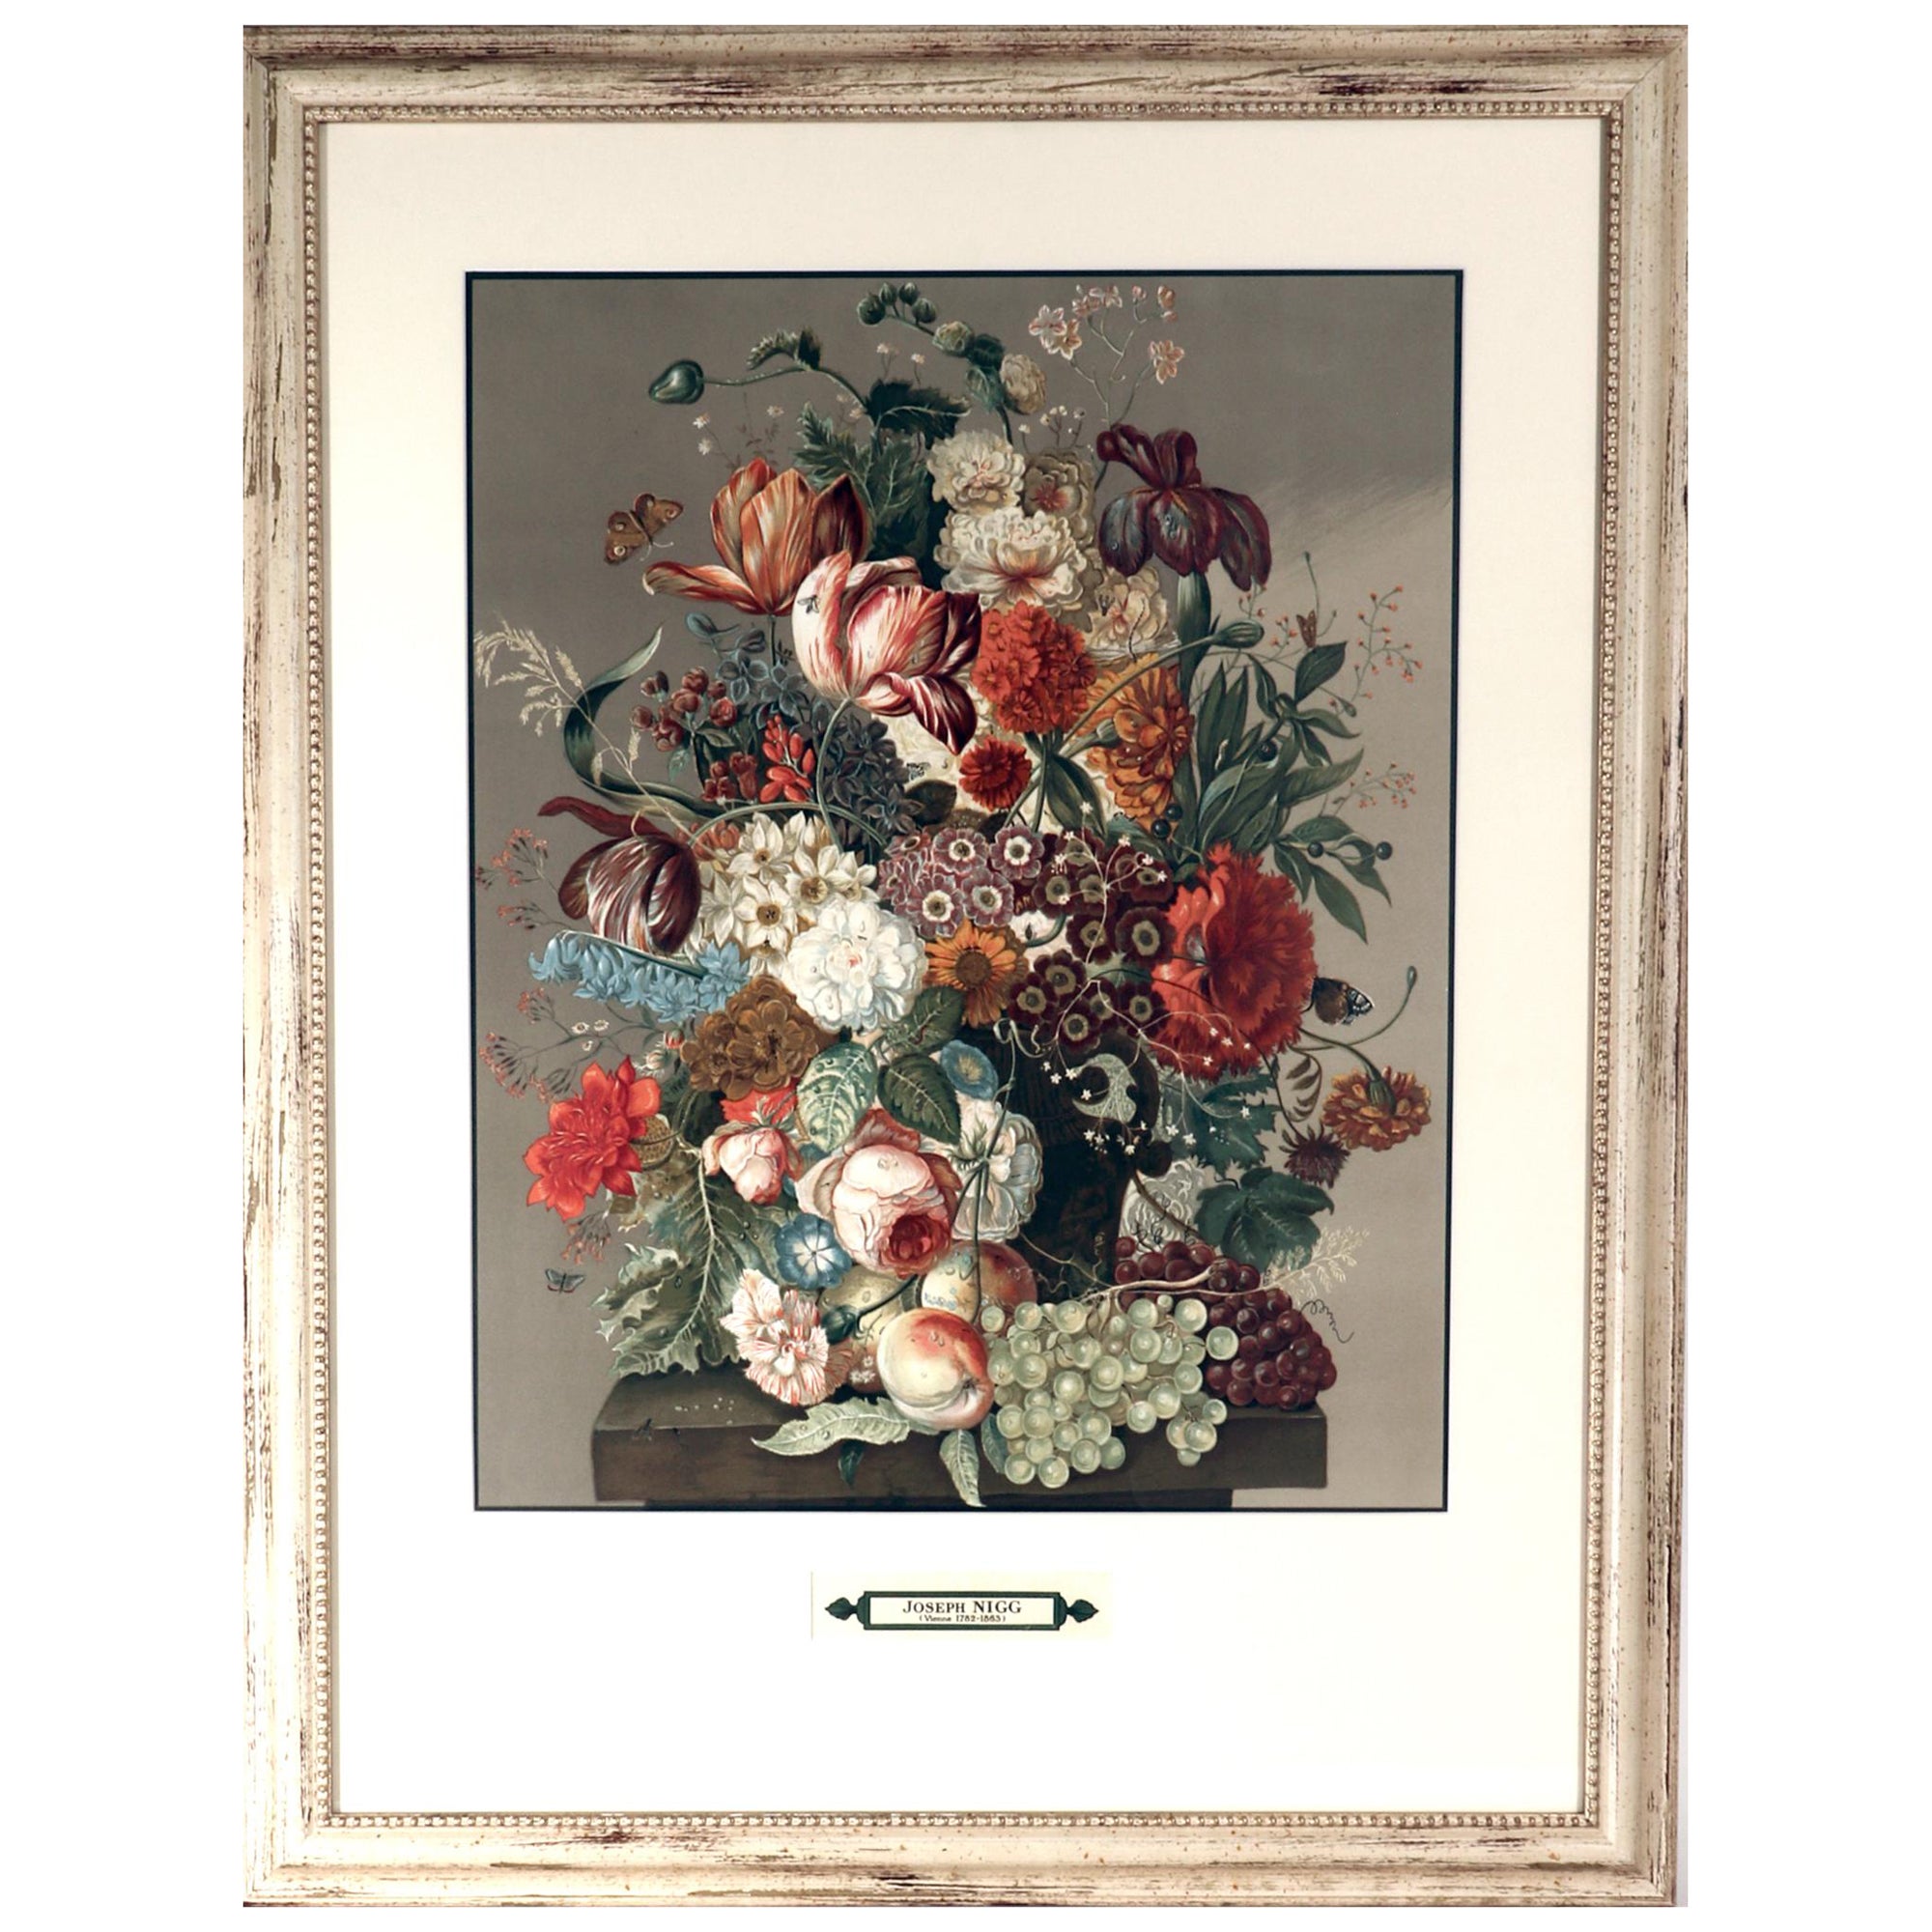 Botanical Large Print After Joseph Nigg, from the Ateliers Lithographiques Mourl For Sale